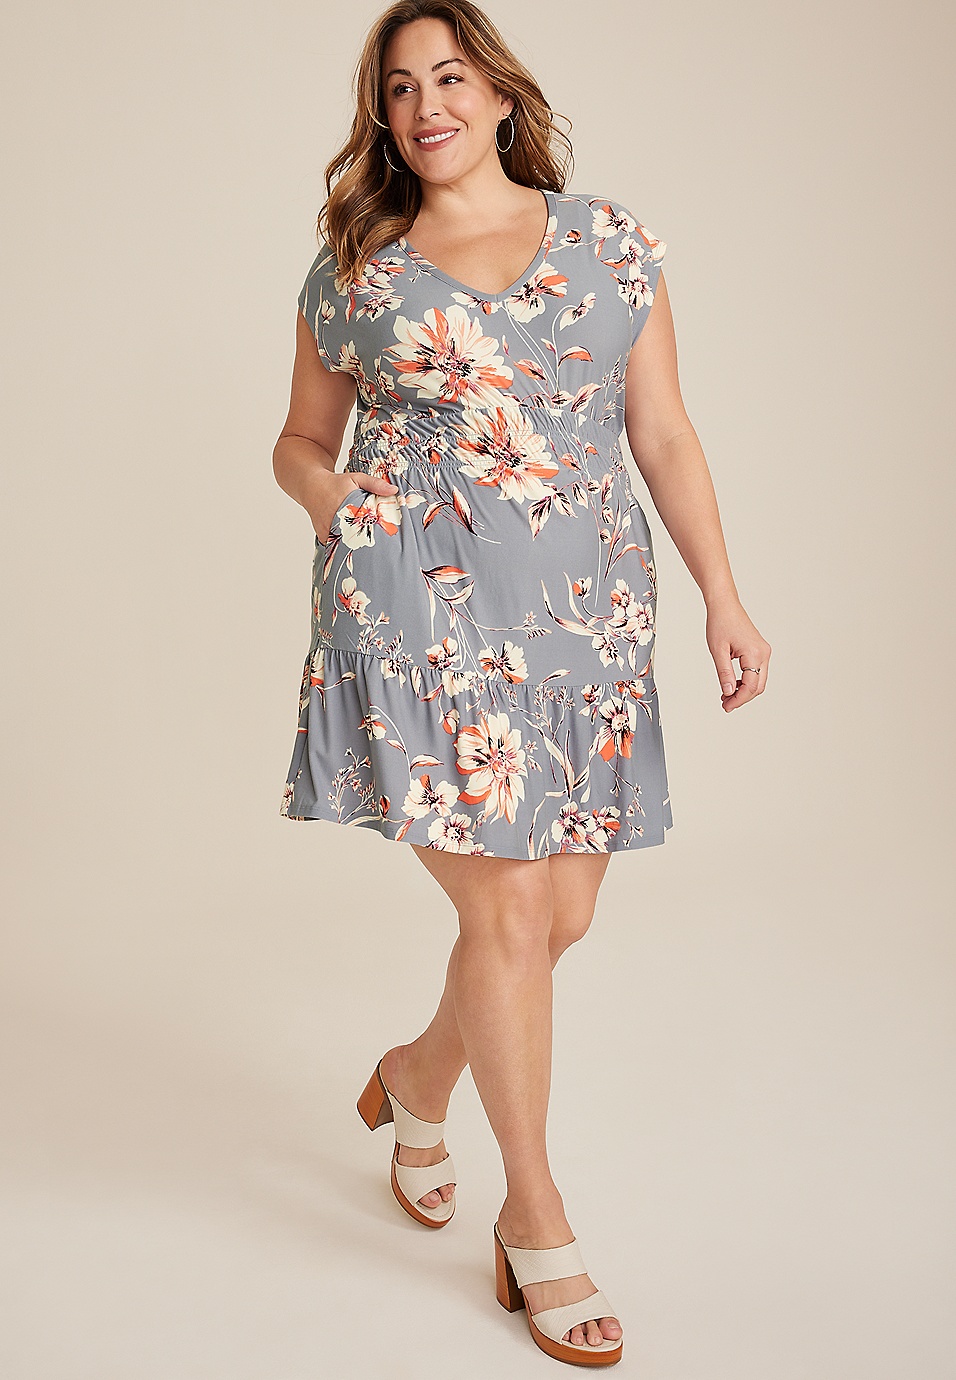 24seven Comfort Apparel Plus Size Fit and Flare Knee Length Tank Dress